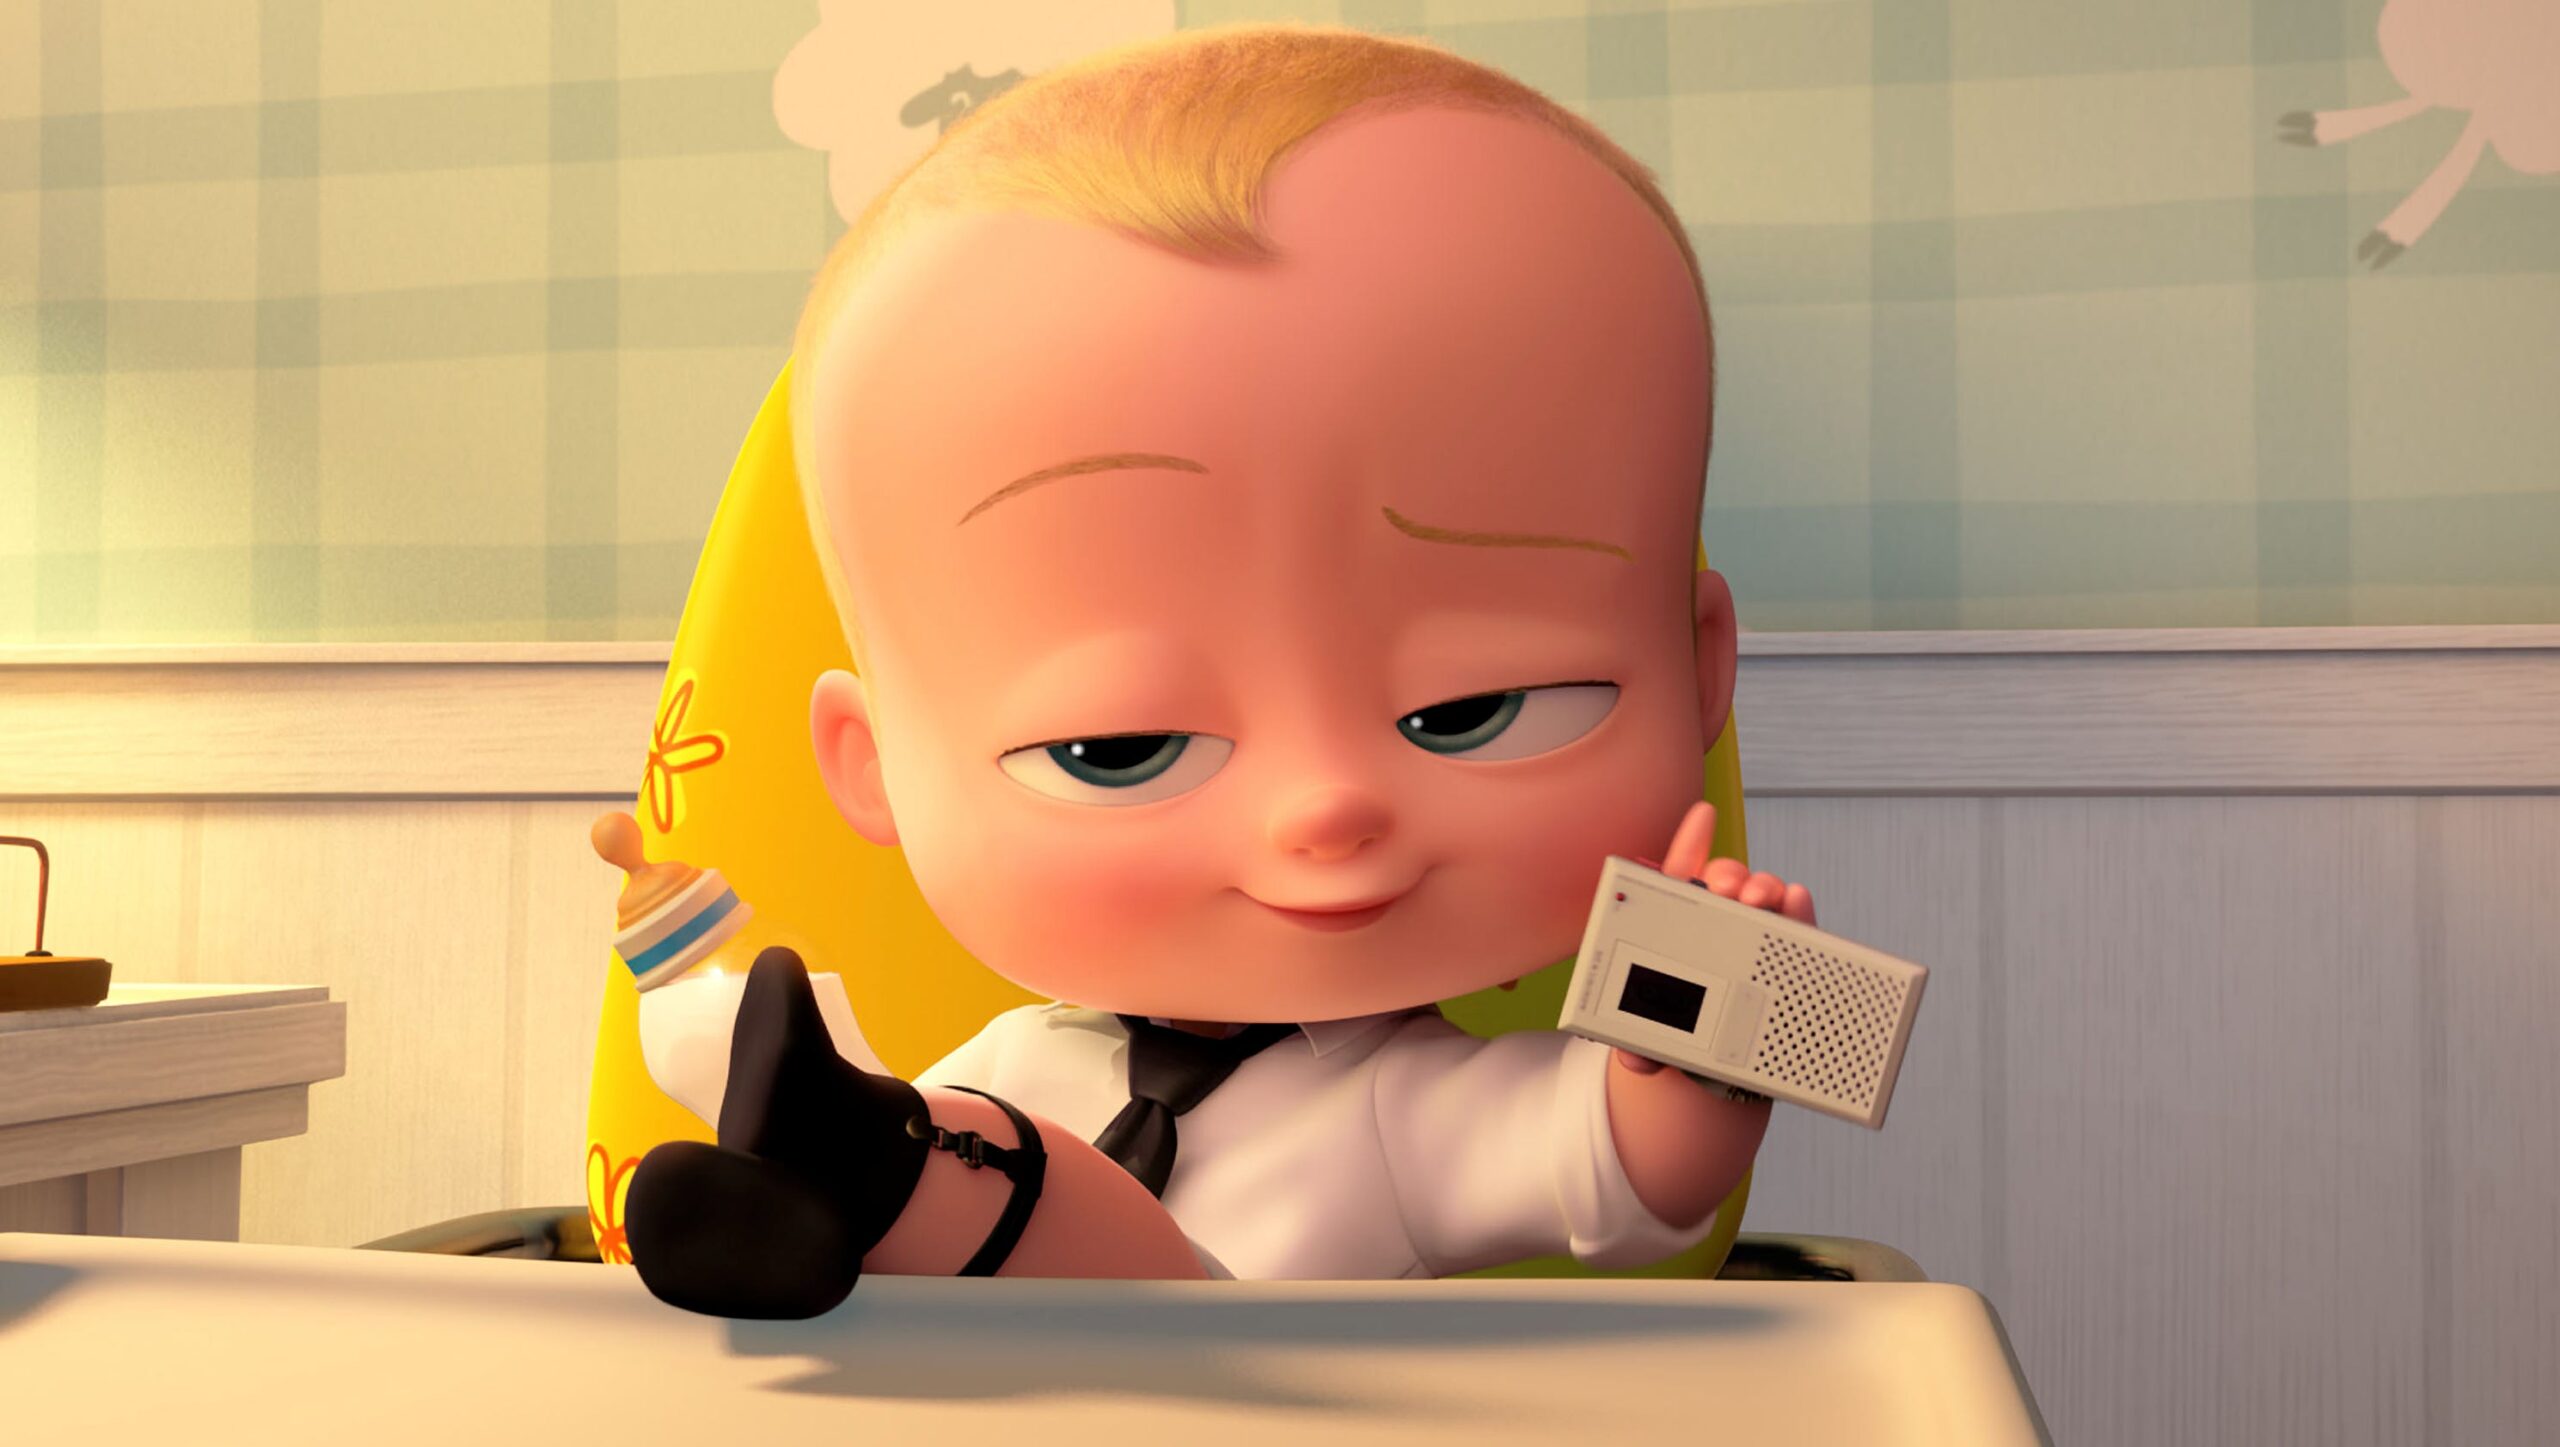 What is Boss Baby's real name?